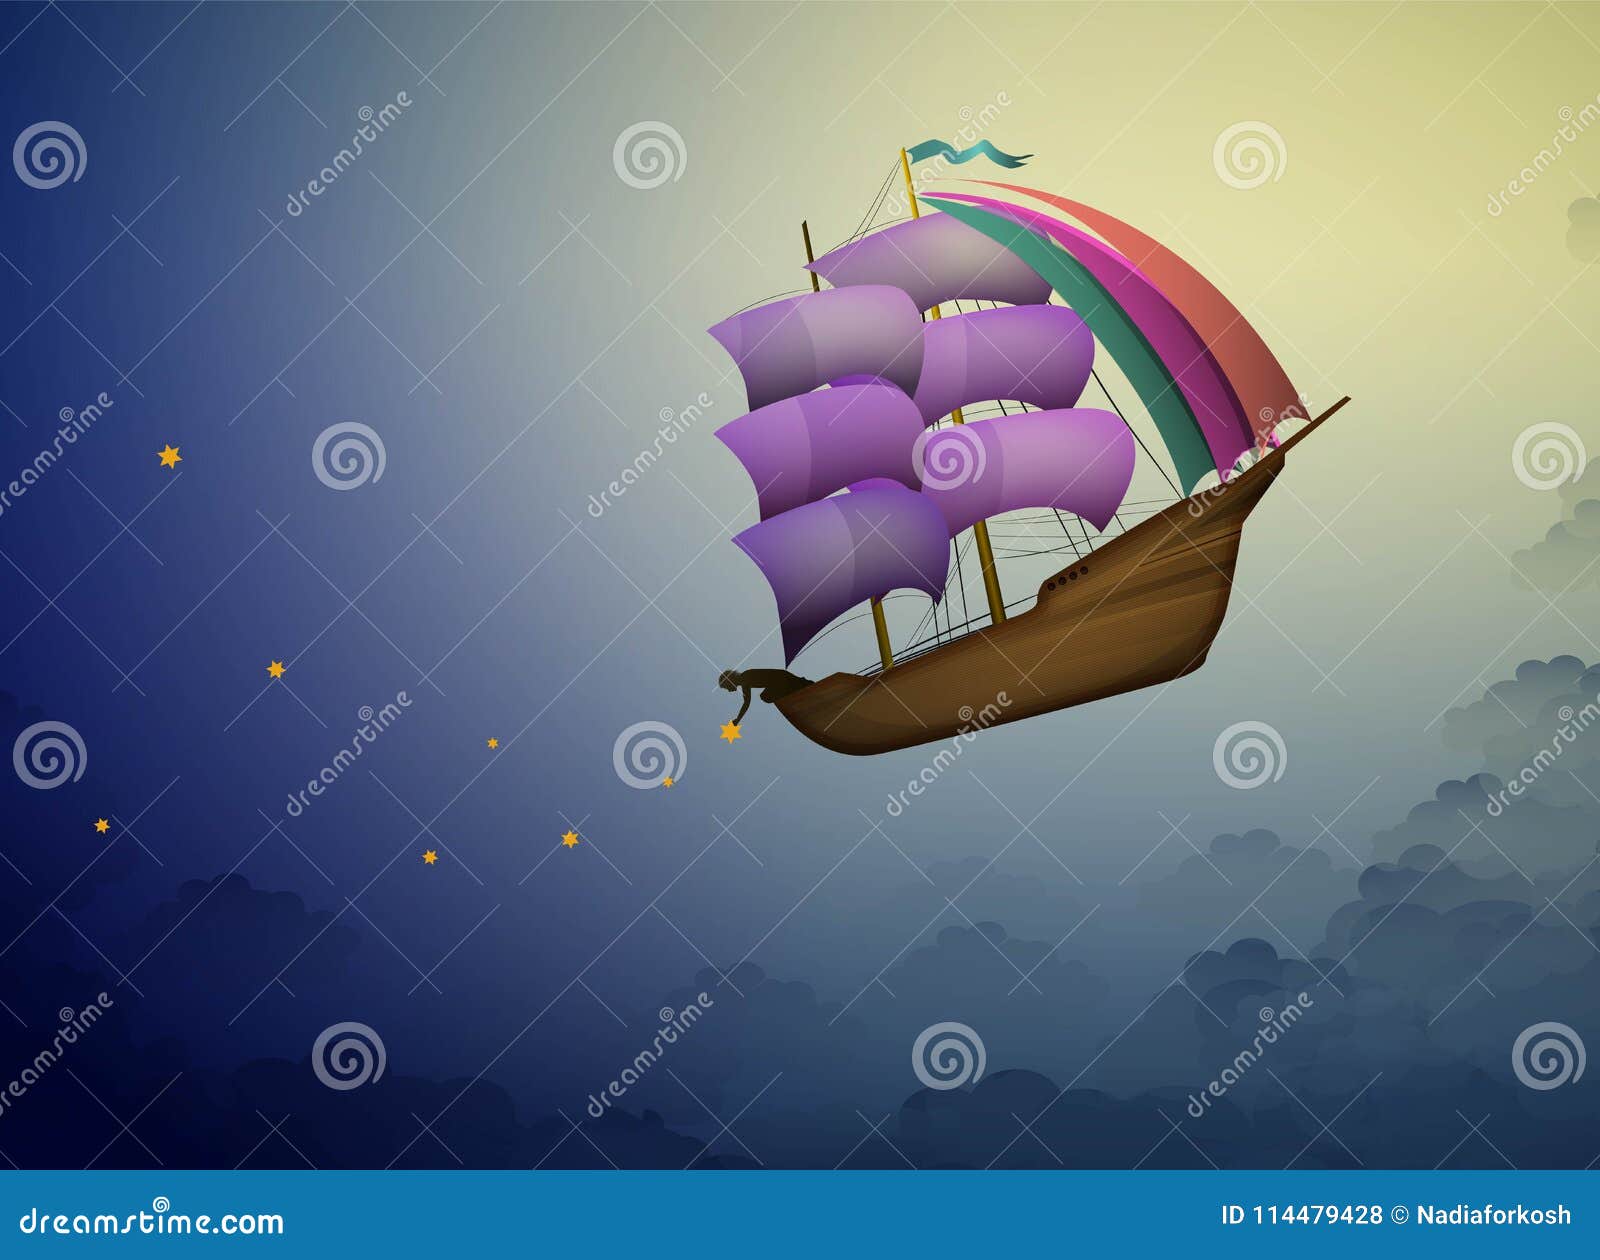 ship in the evening sky in clouds, fairy boy putting stars on the night sky, fairy dreamland sailor on the heavens,